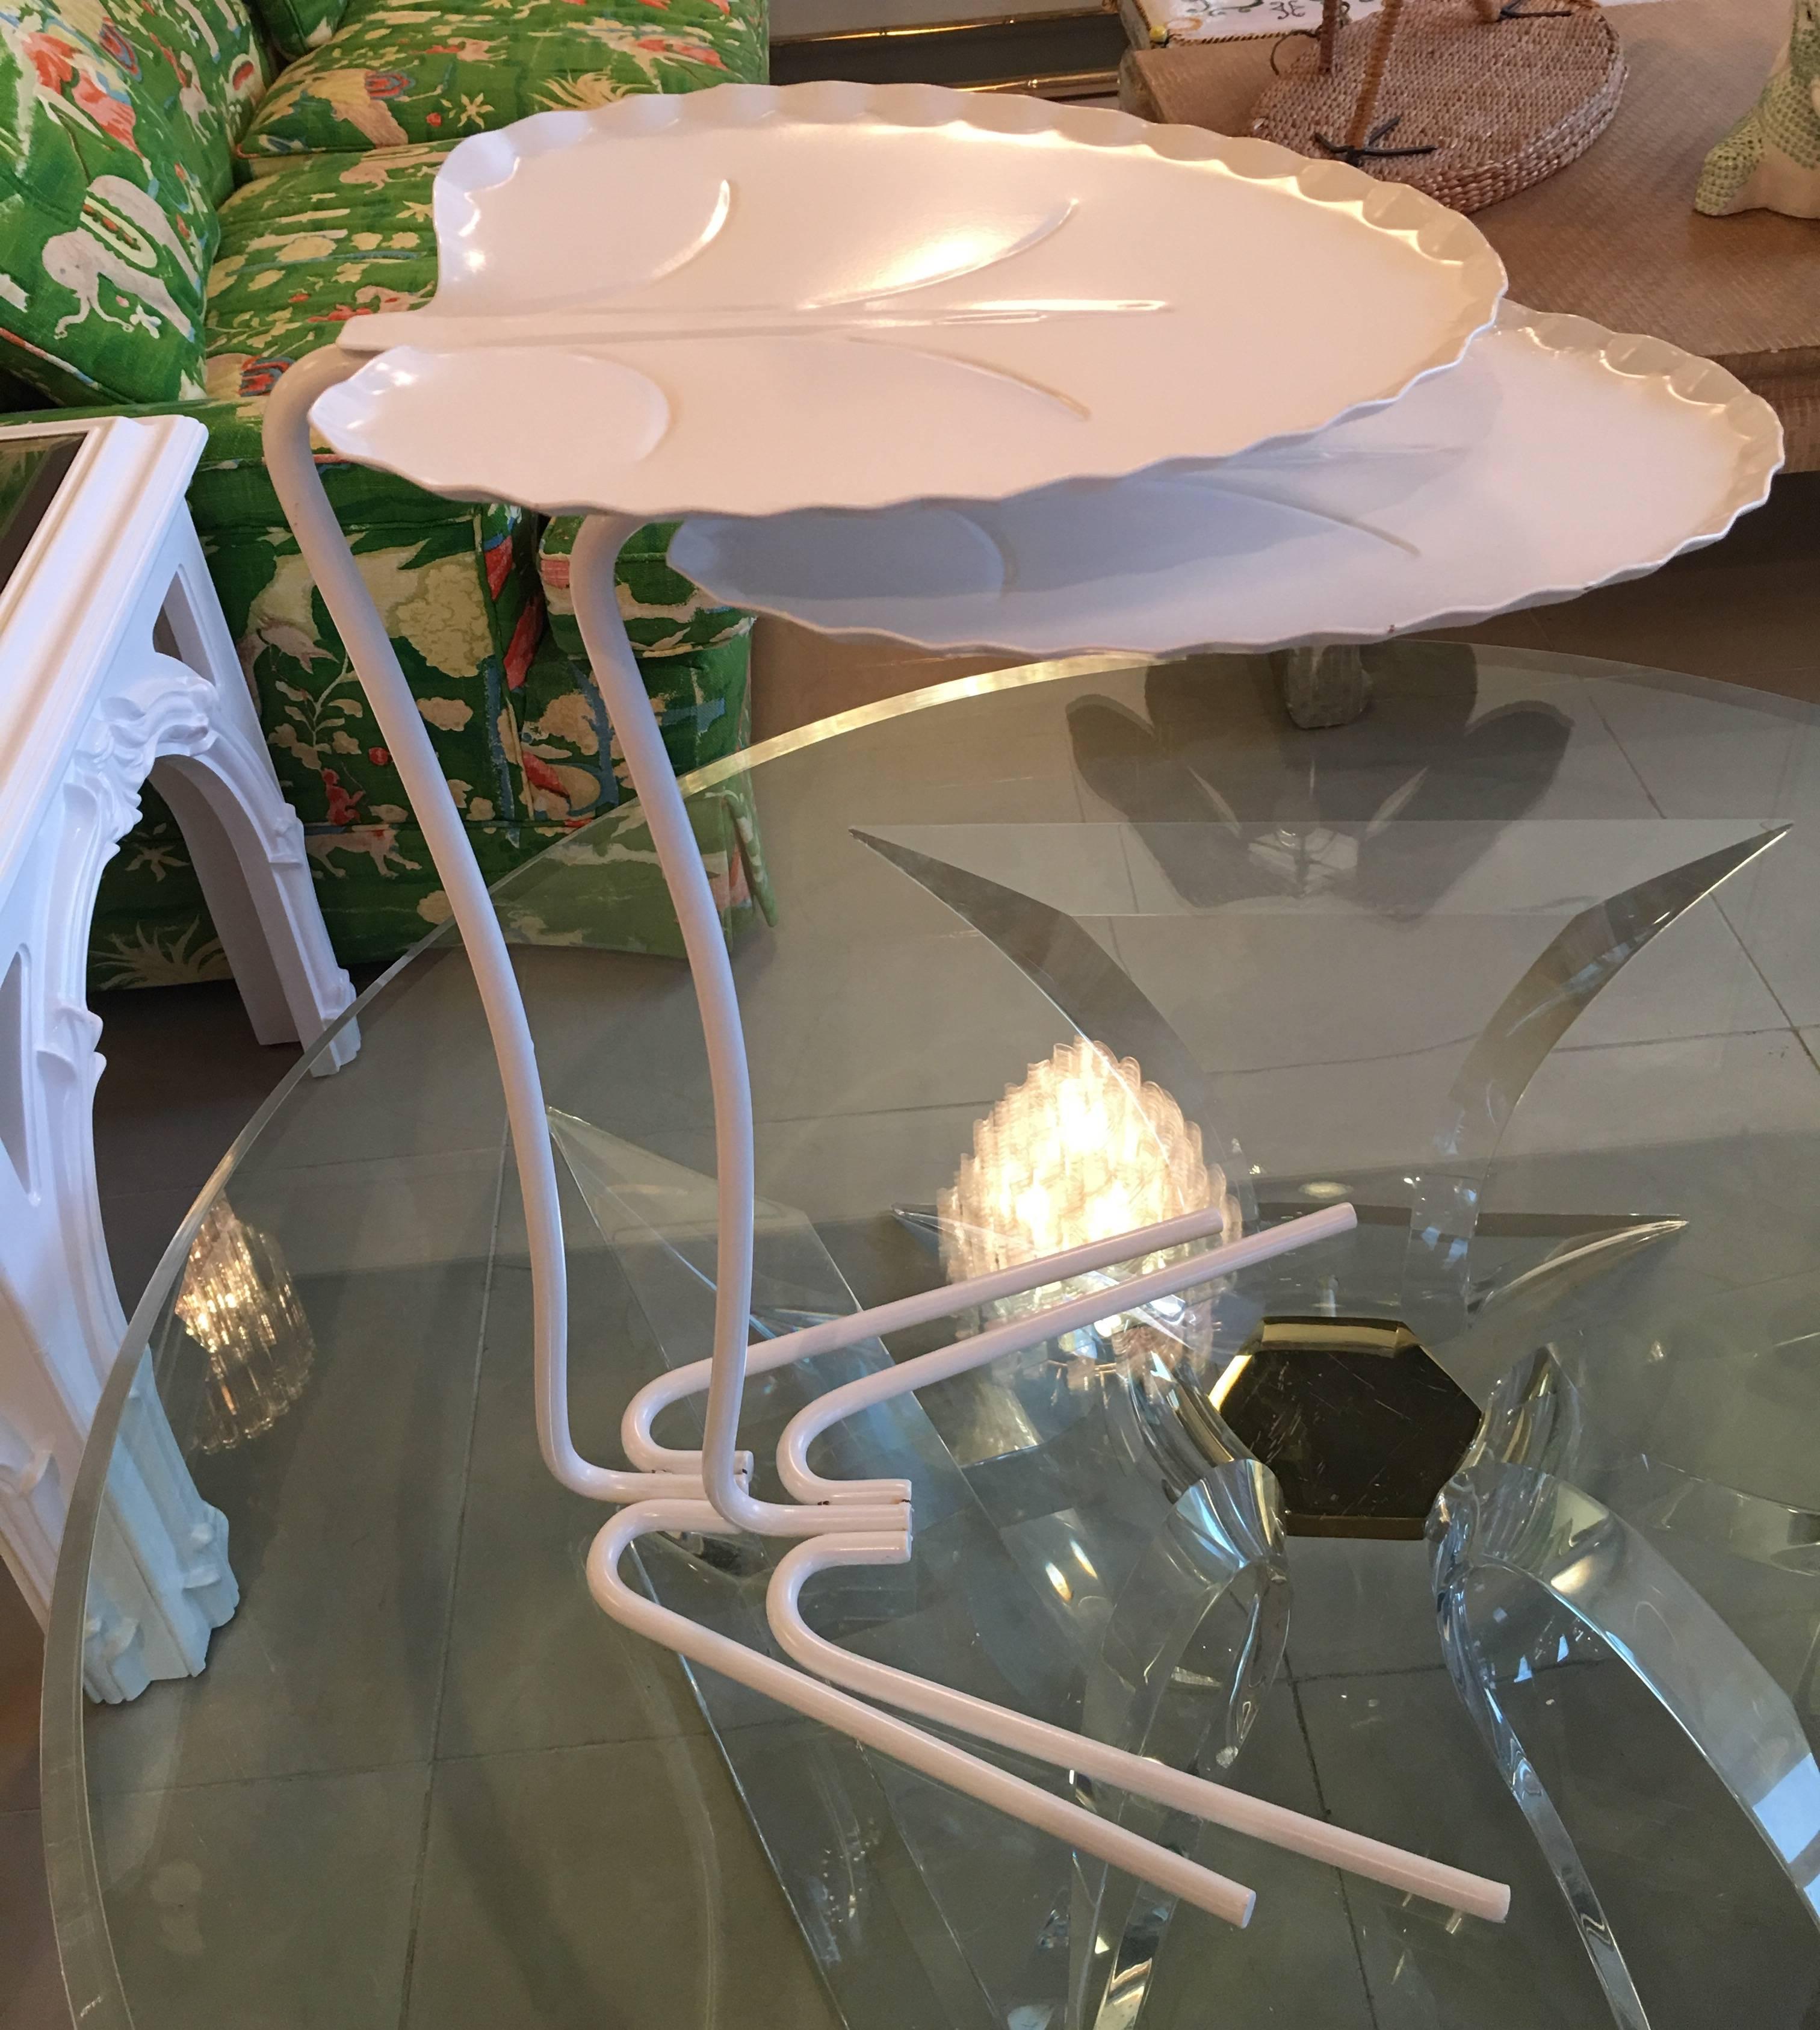 Pair of vintage metal Salterini lily pad leaf nesting side or end tables. Newly powdercoated in a white finish. Perfect for inside or outside in a sunroom by a pool, or on a porch. Great Mid-Century Modern, Hollywood Regency, Palm Beach look. Cute